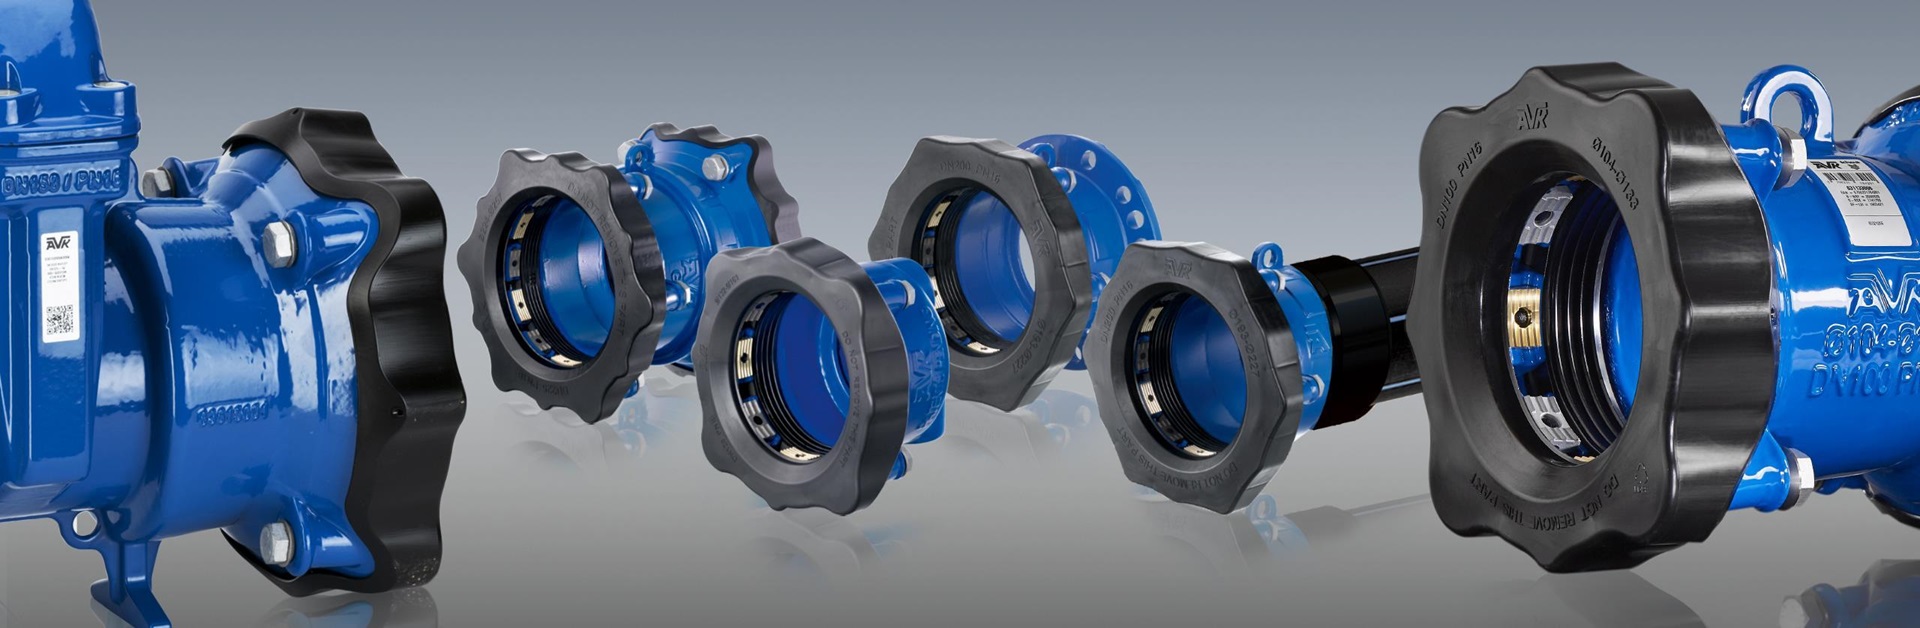 A complete range of large tolerance universal and tensile couplings